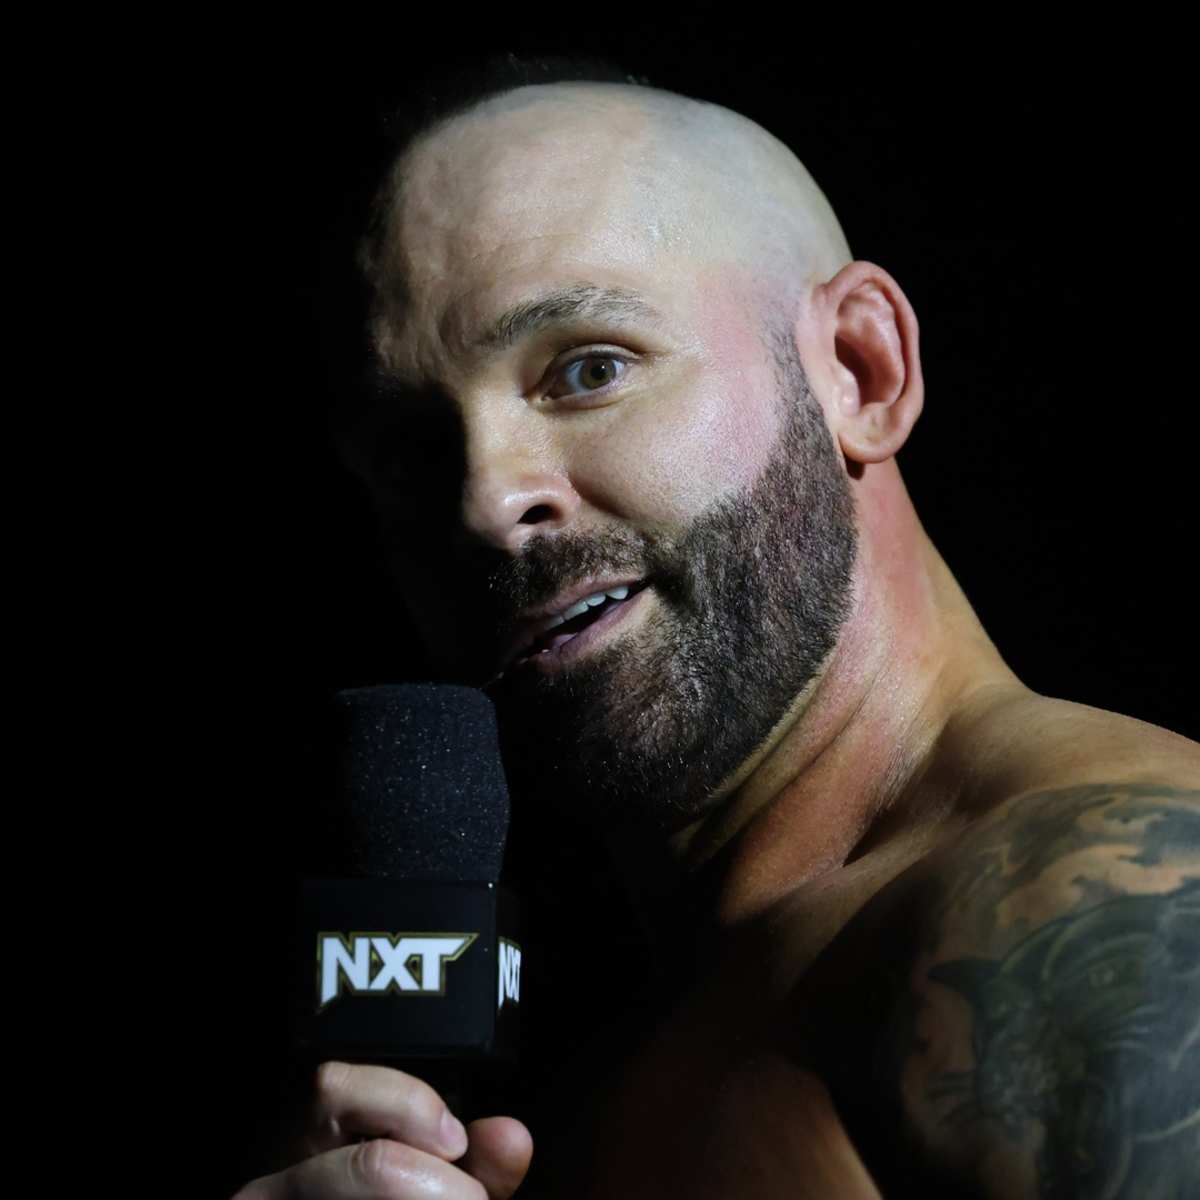 Shawn Spears says he doesn't have a lot of time left in wrestling